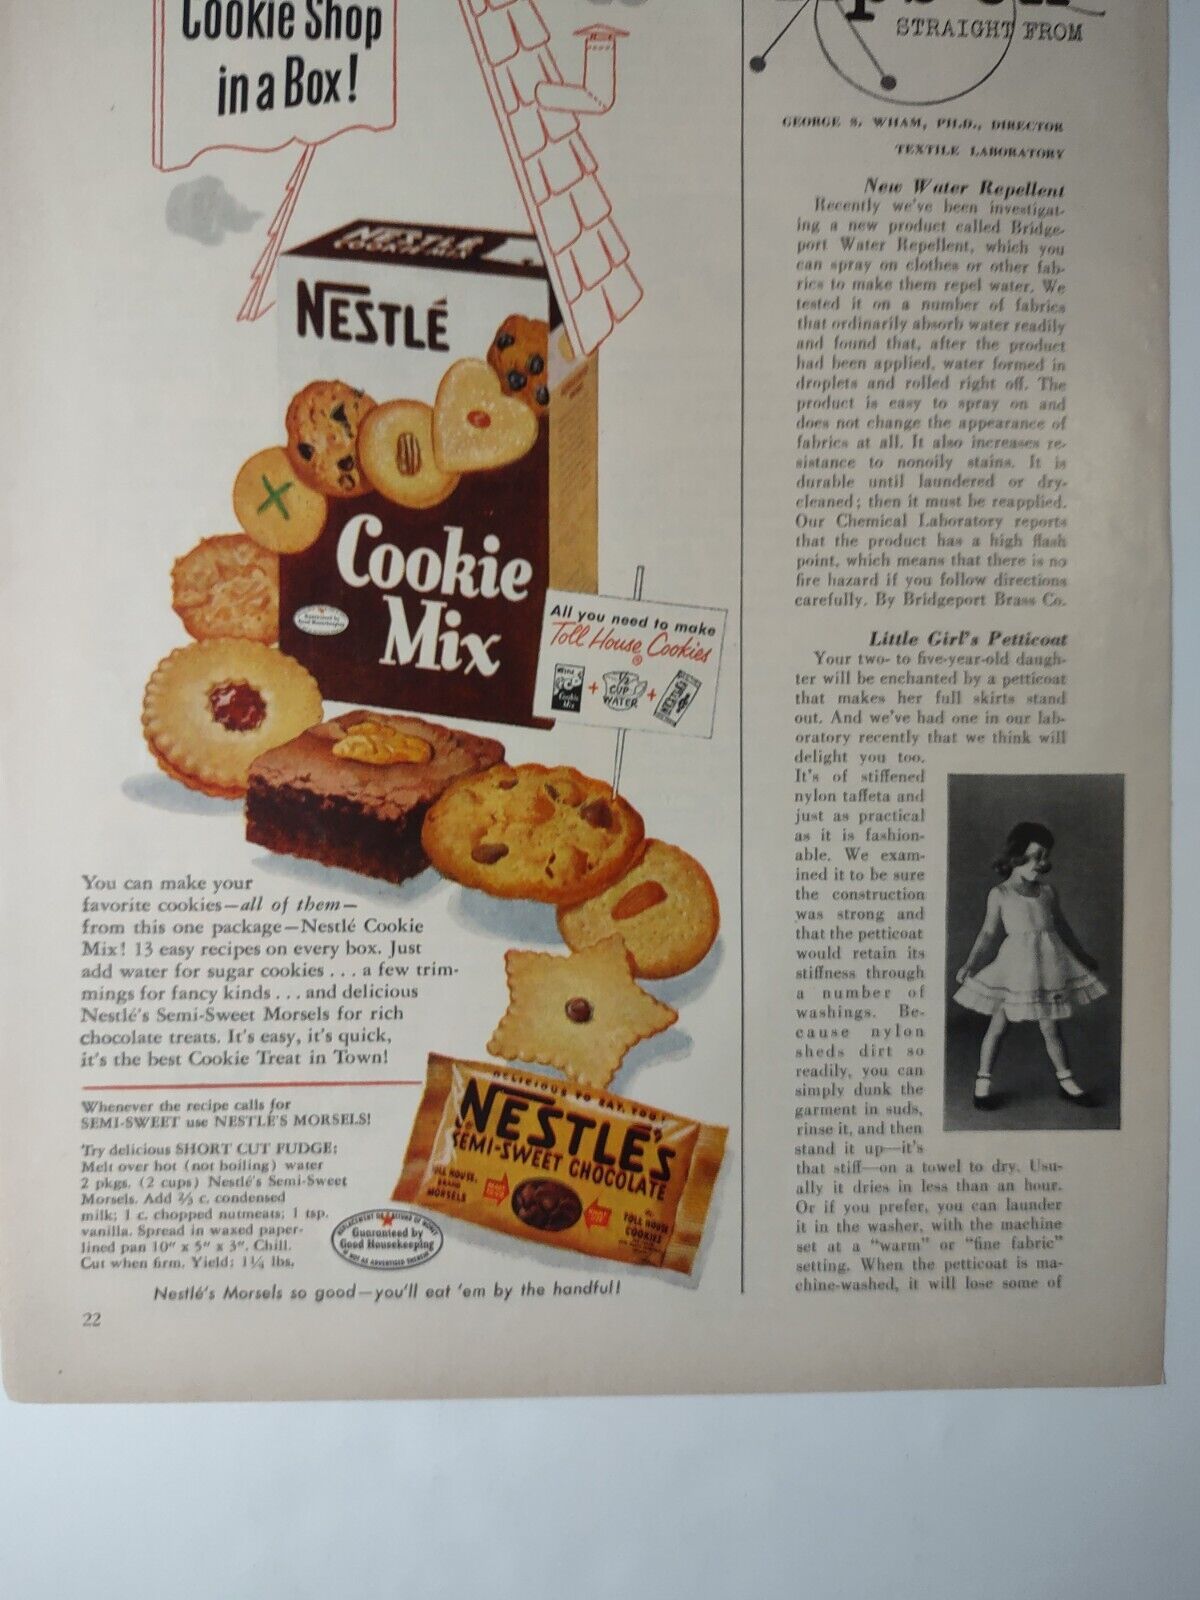 Nestle Cookie Mix Shop in a Box Vintage 1950s Print Ad